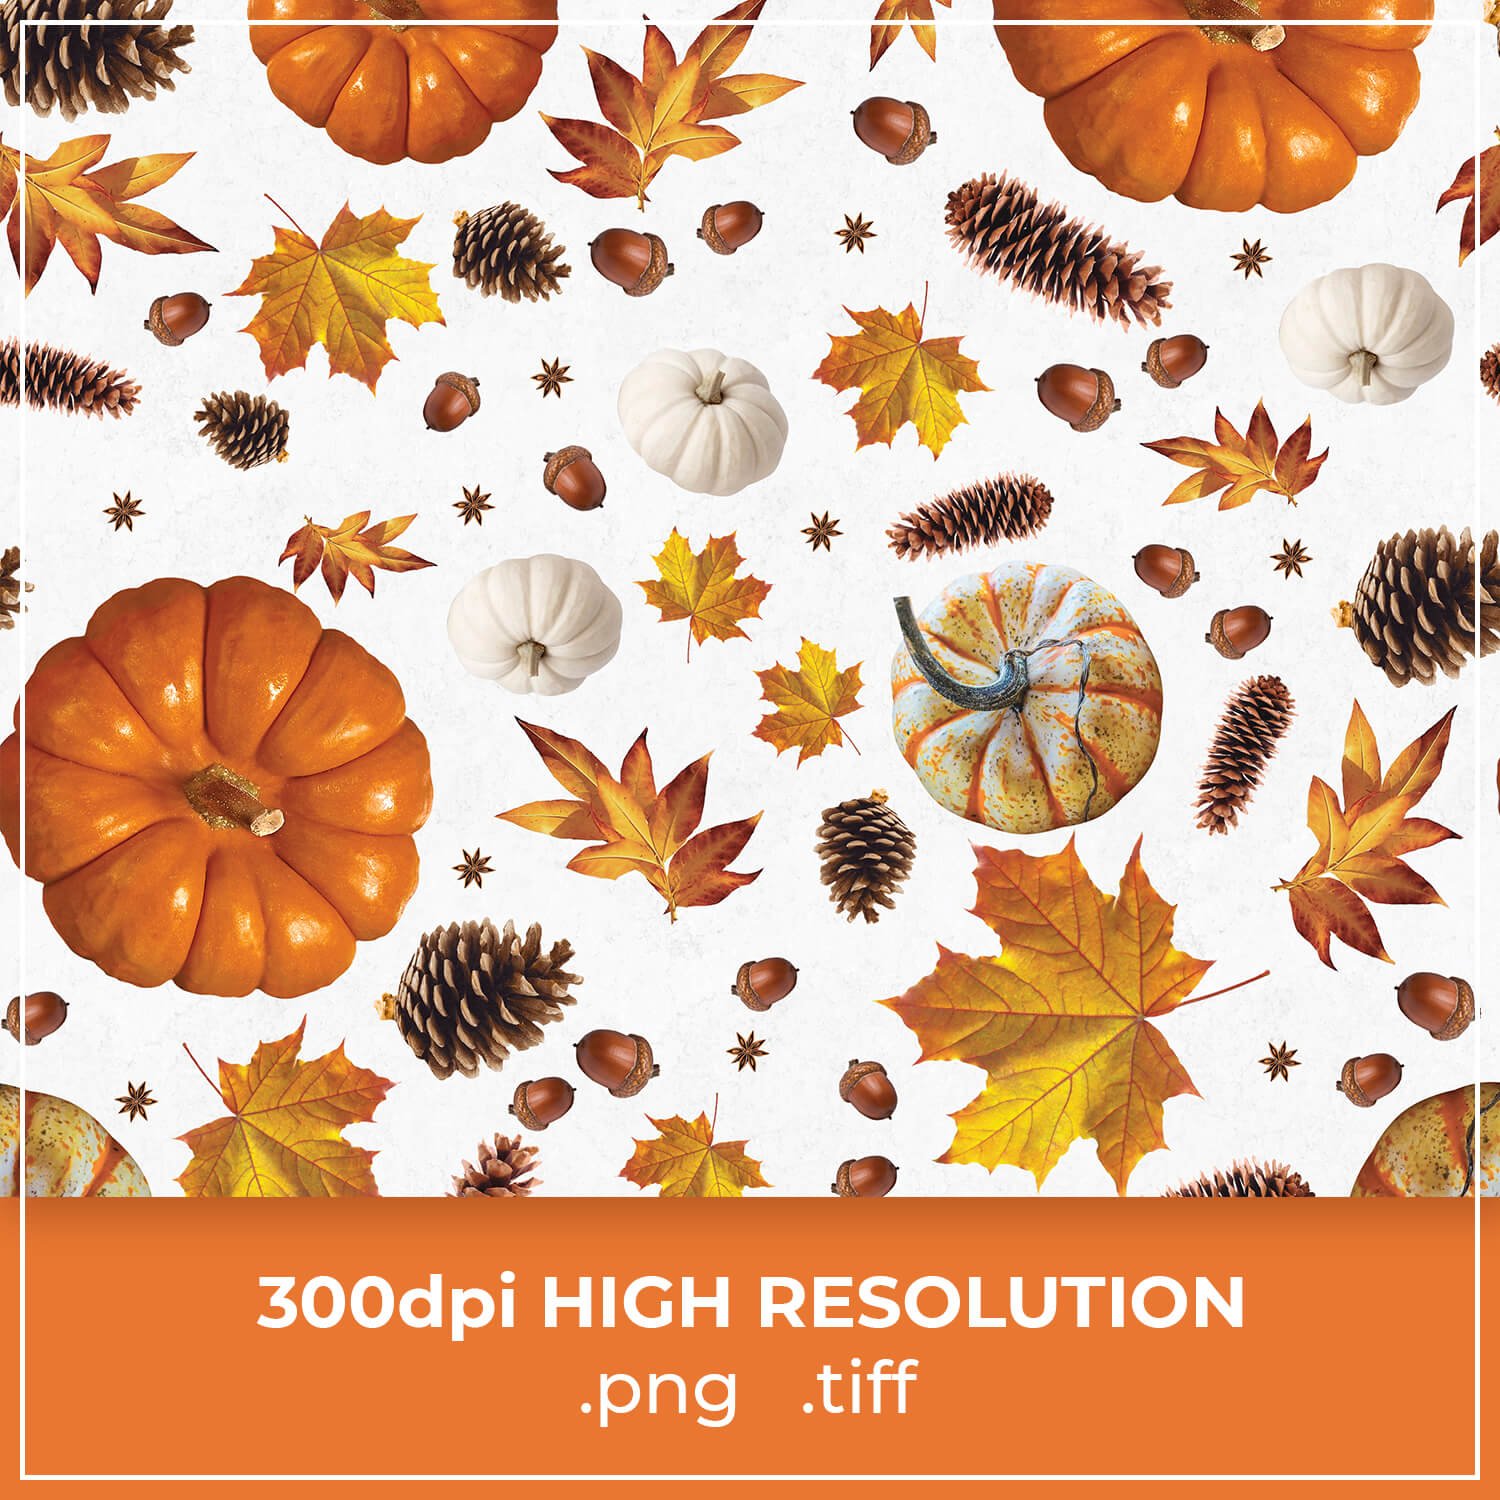 Free White Thanksgiving Patterns cover image.